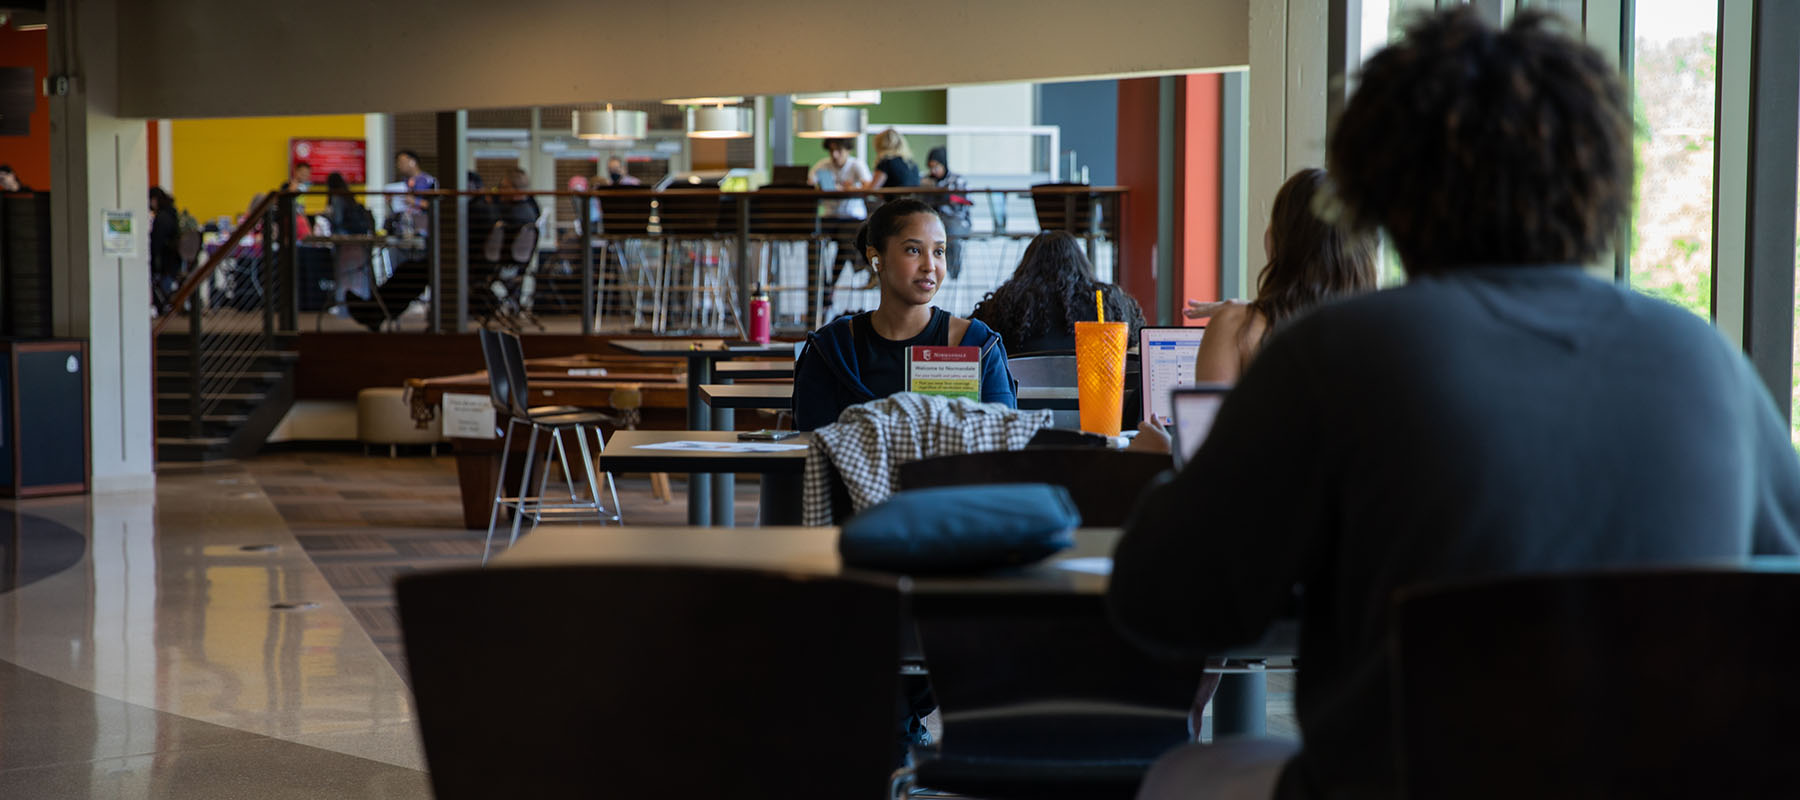 Students in the Kopp Center.